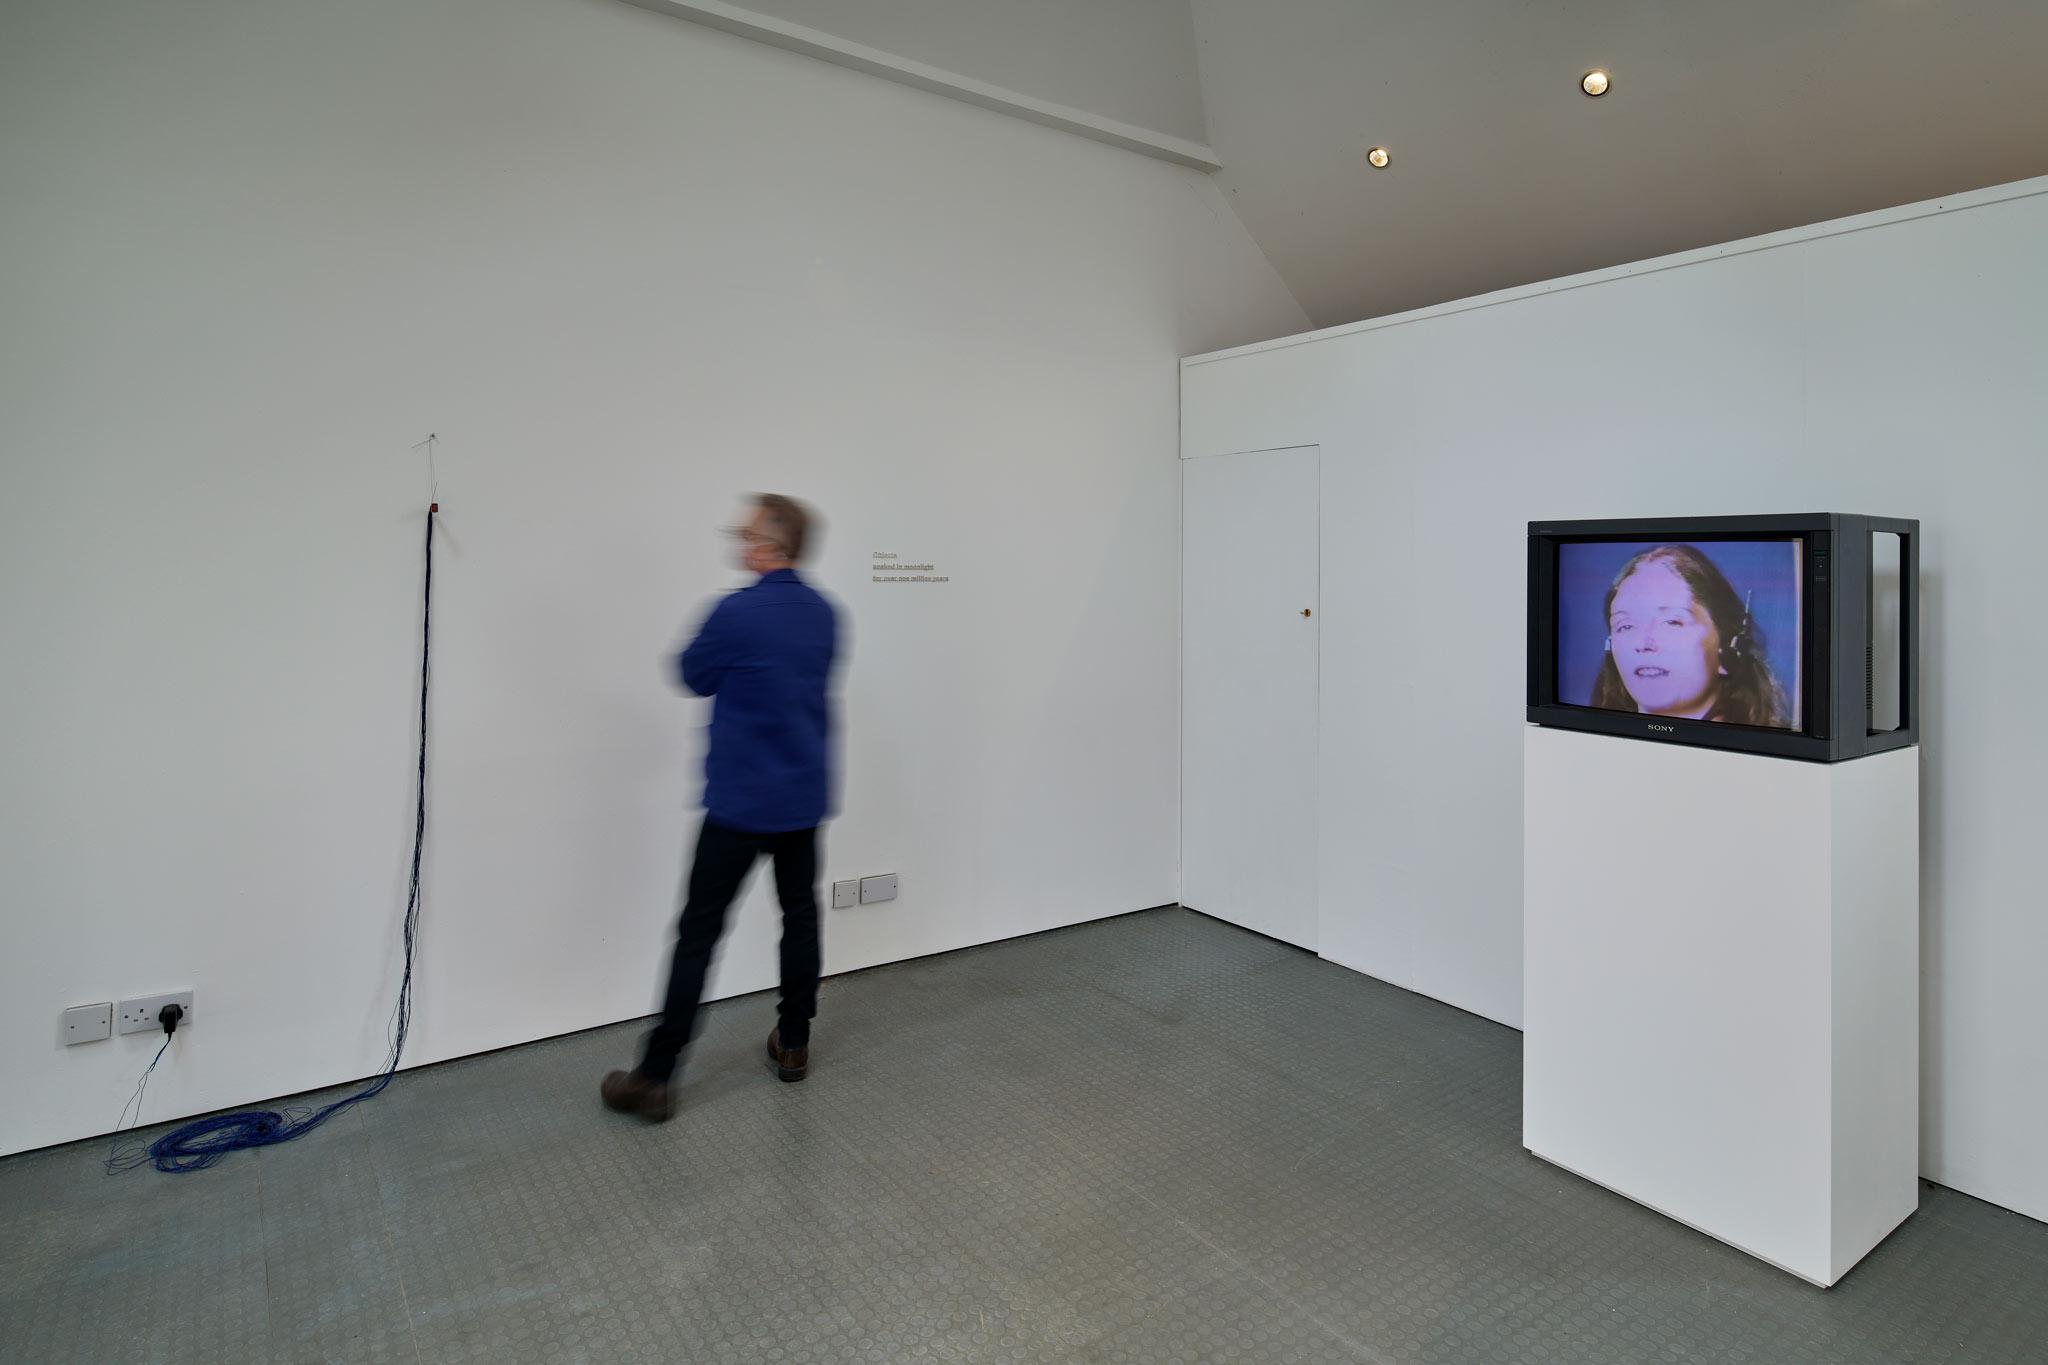 a person standing in a gallery space with a monitor on the right side and a wire sculpture on the left